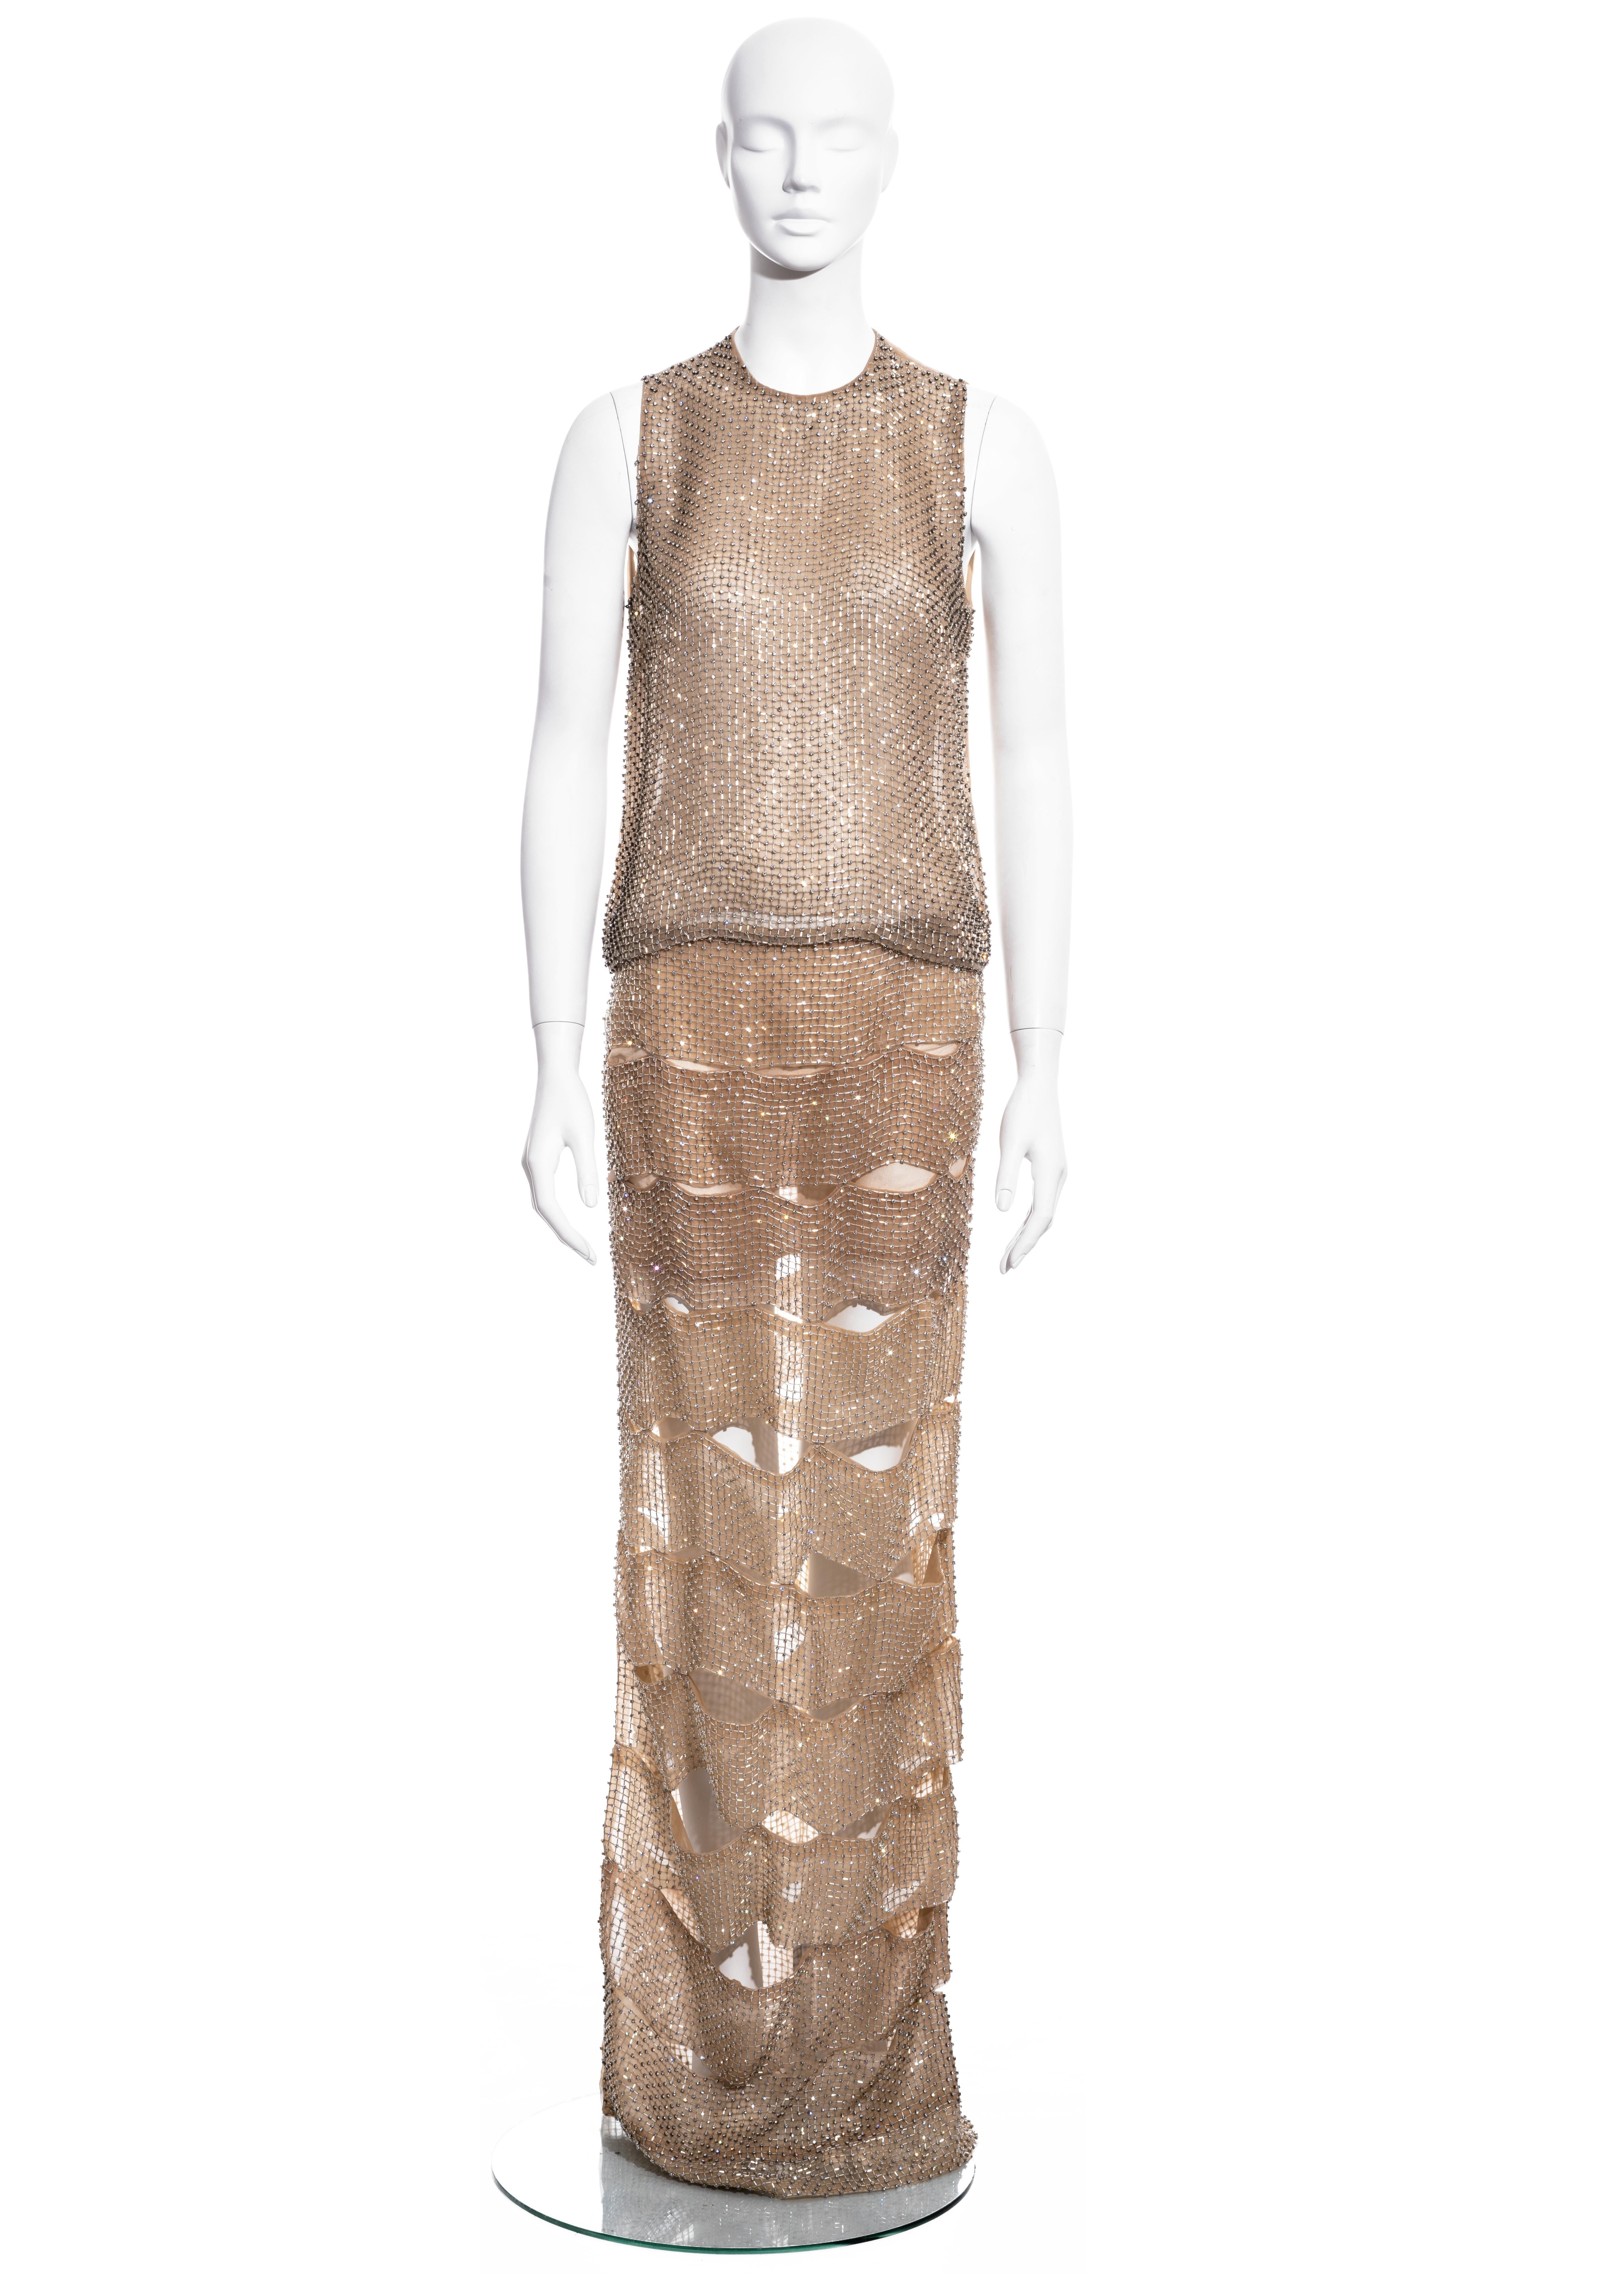 ▪ Tom Ford evening dress comprising; skirt and top  
▪ Constructed with nude silk organza and a lattice of glass beads 
▪ Skirt formed from pieced strips  
▪ Matching bodice with sheer back panel
▪ IT 40 - FR 36 - UK 8 - US 4 
▪ Spring-Summer 2013